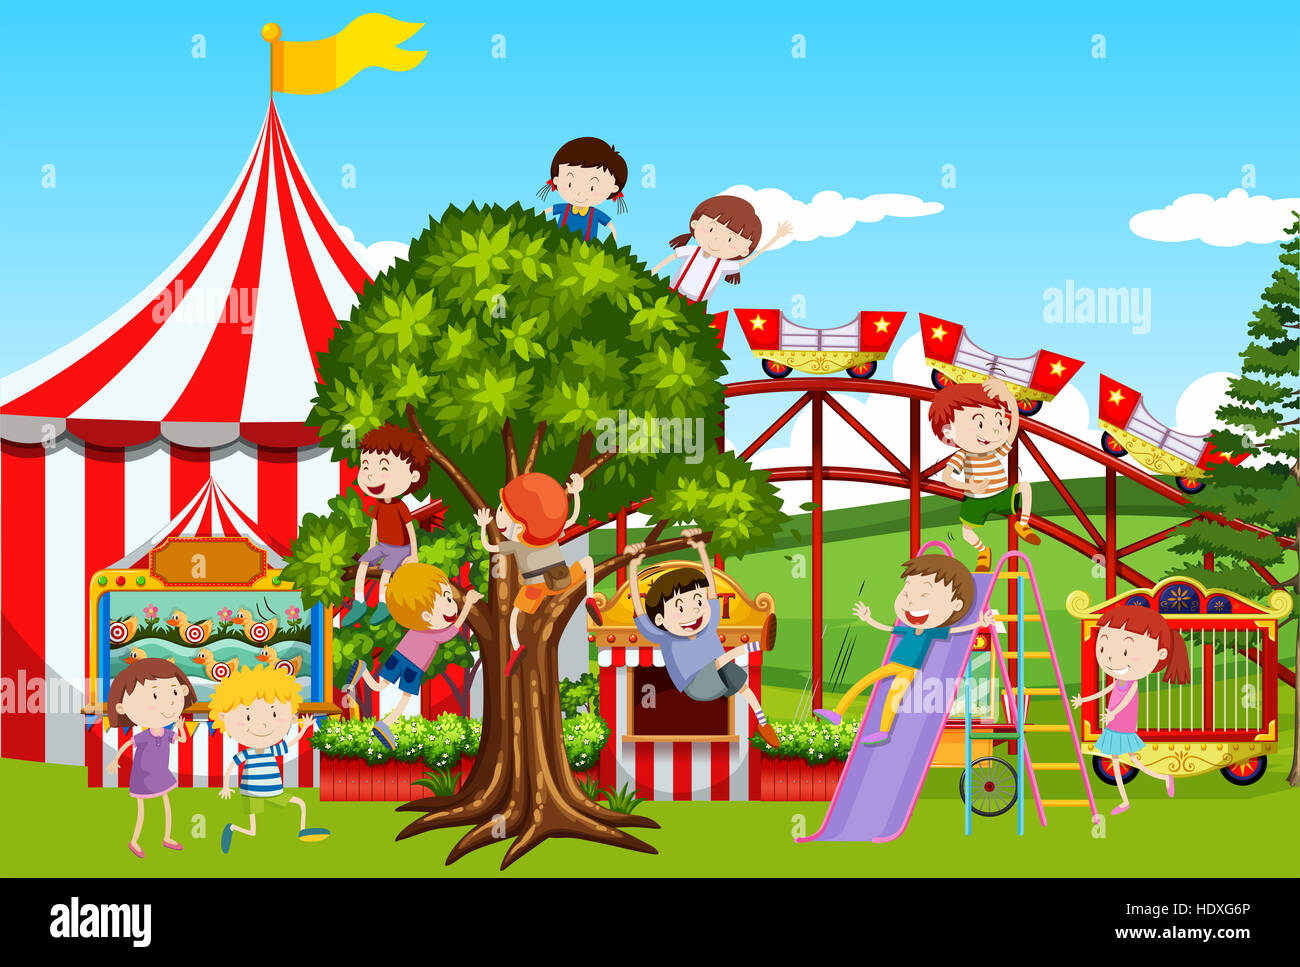 Many kids playing in the fun park illustration Stock Photo